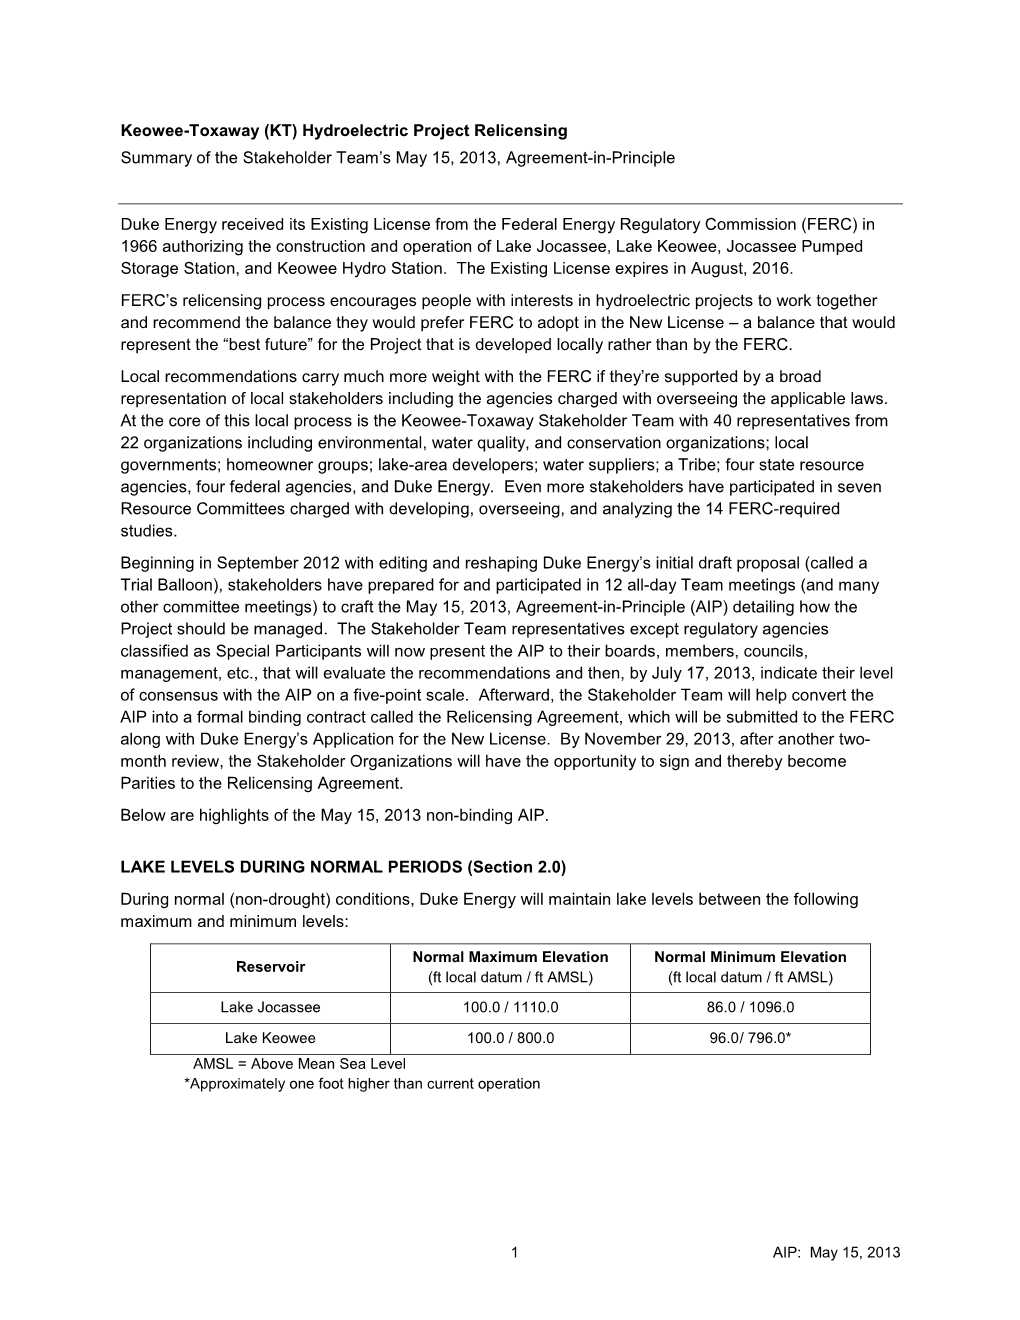 Keowee-Toxaway (KT) Hydroelectric Project Relicensing Summary of the Stakeholder Team’S May 15, 2013, Agreement-In-Principle